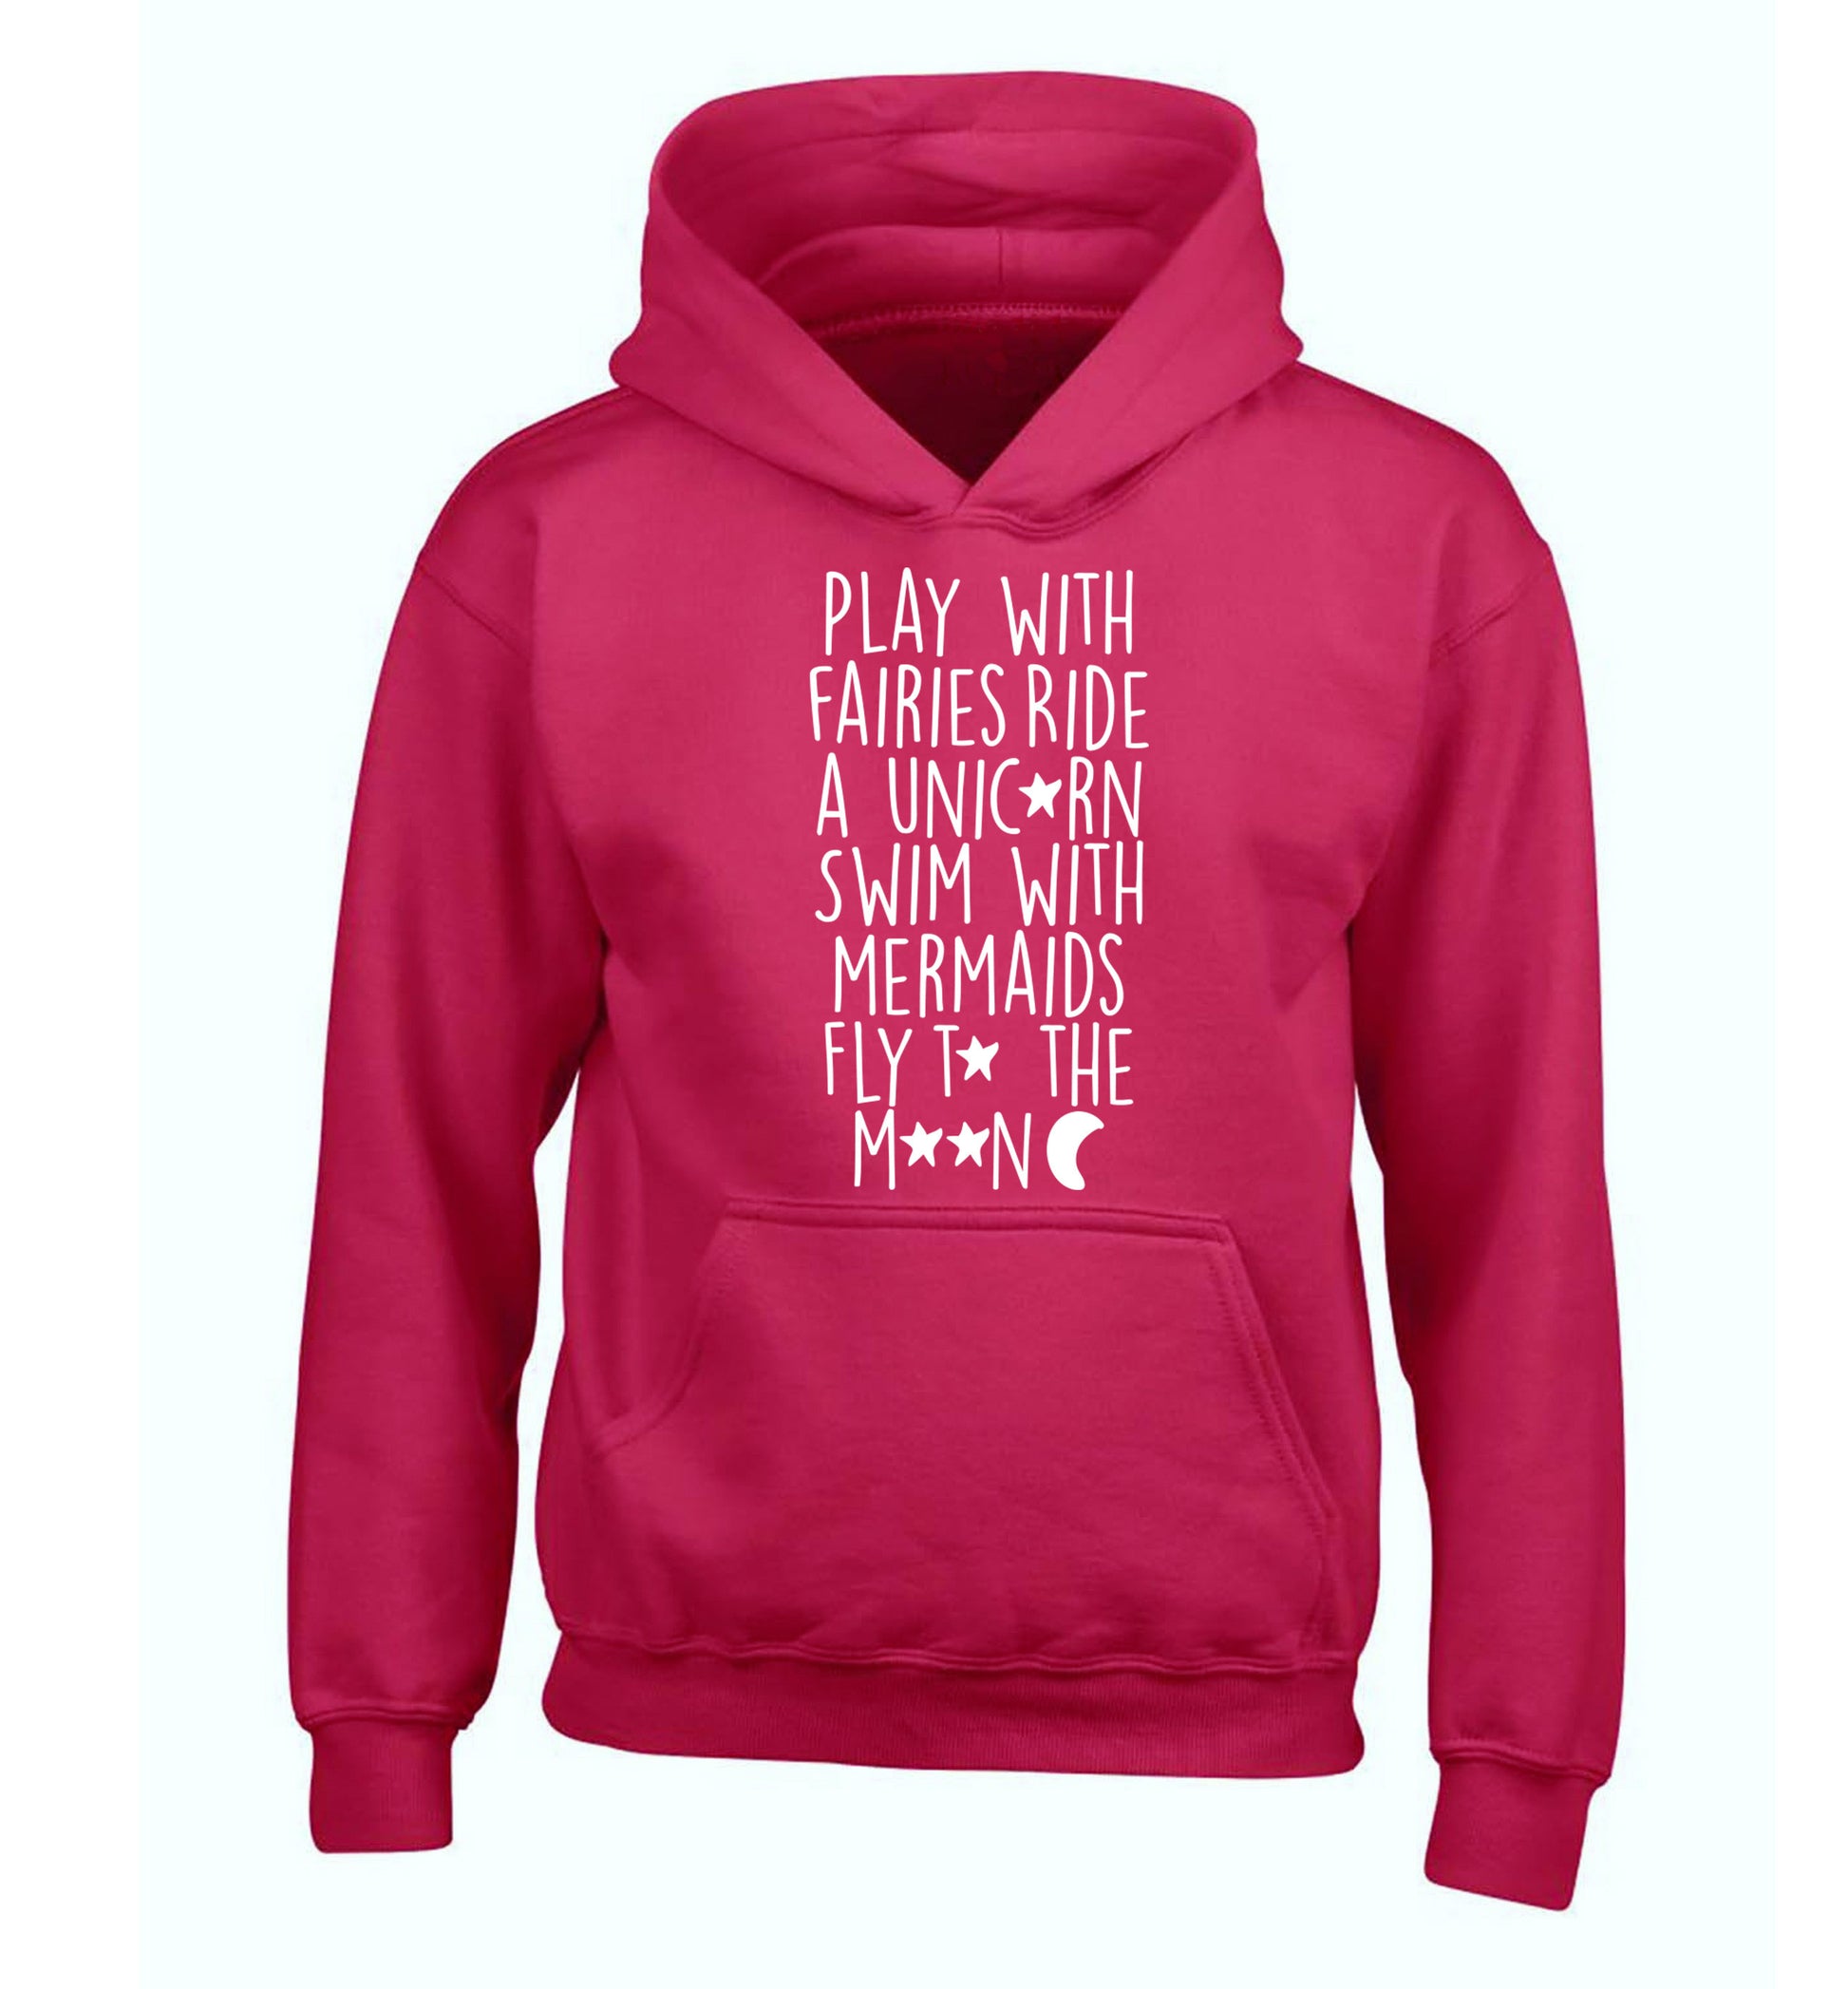 Play with fairies ride a unicorn swim with mermaids fly to the moon children's pink hoodie 12-14 Years